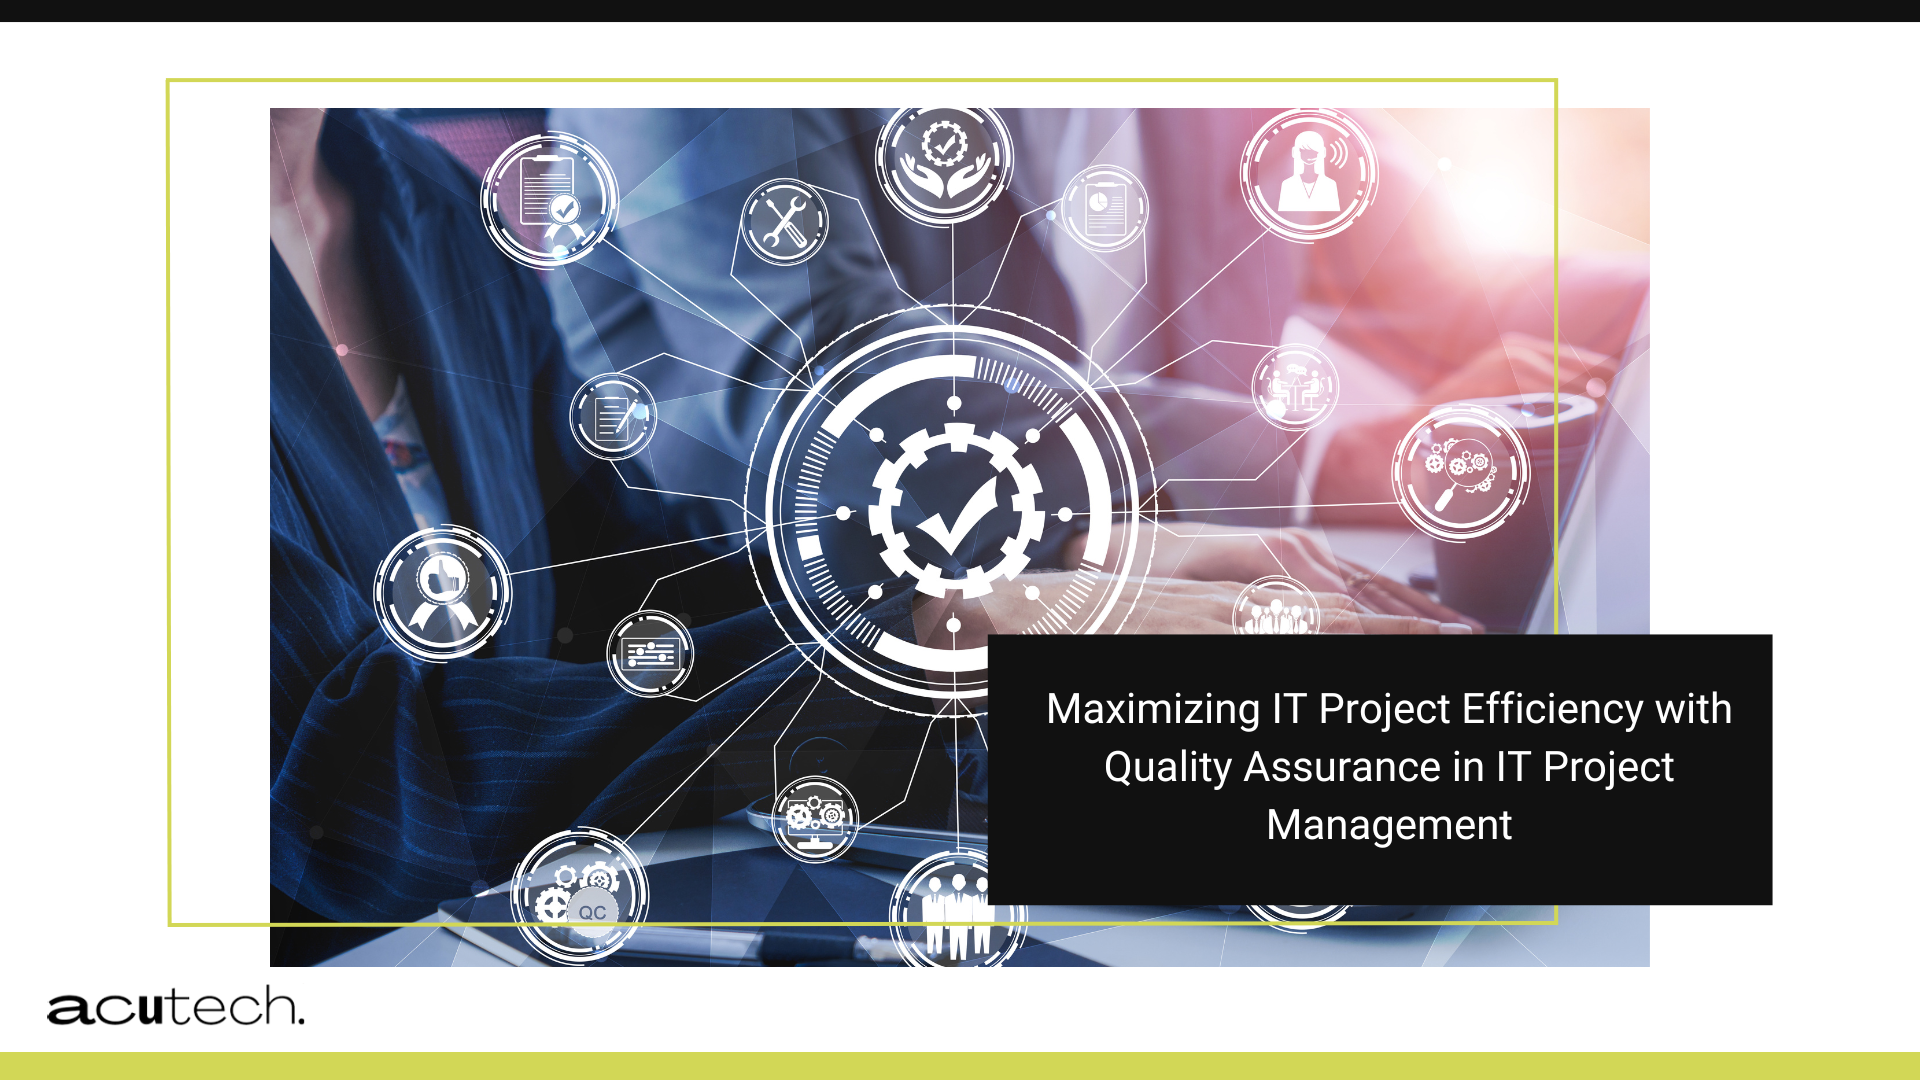 Maximizing IT Project Efficiency with Quality Assurance in IT Project Management